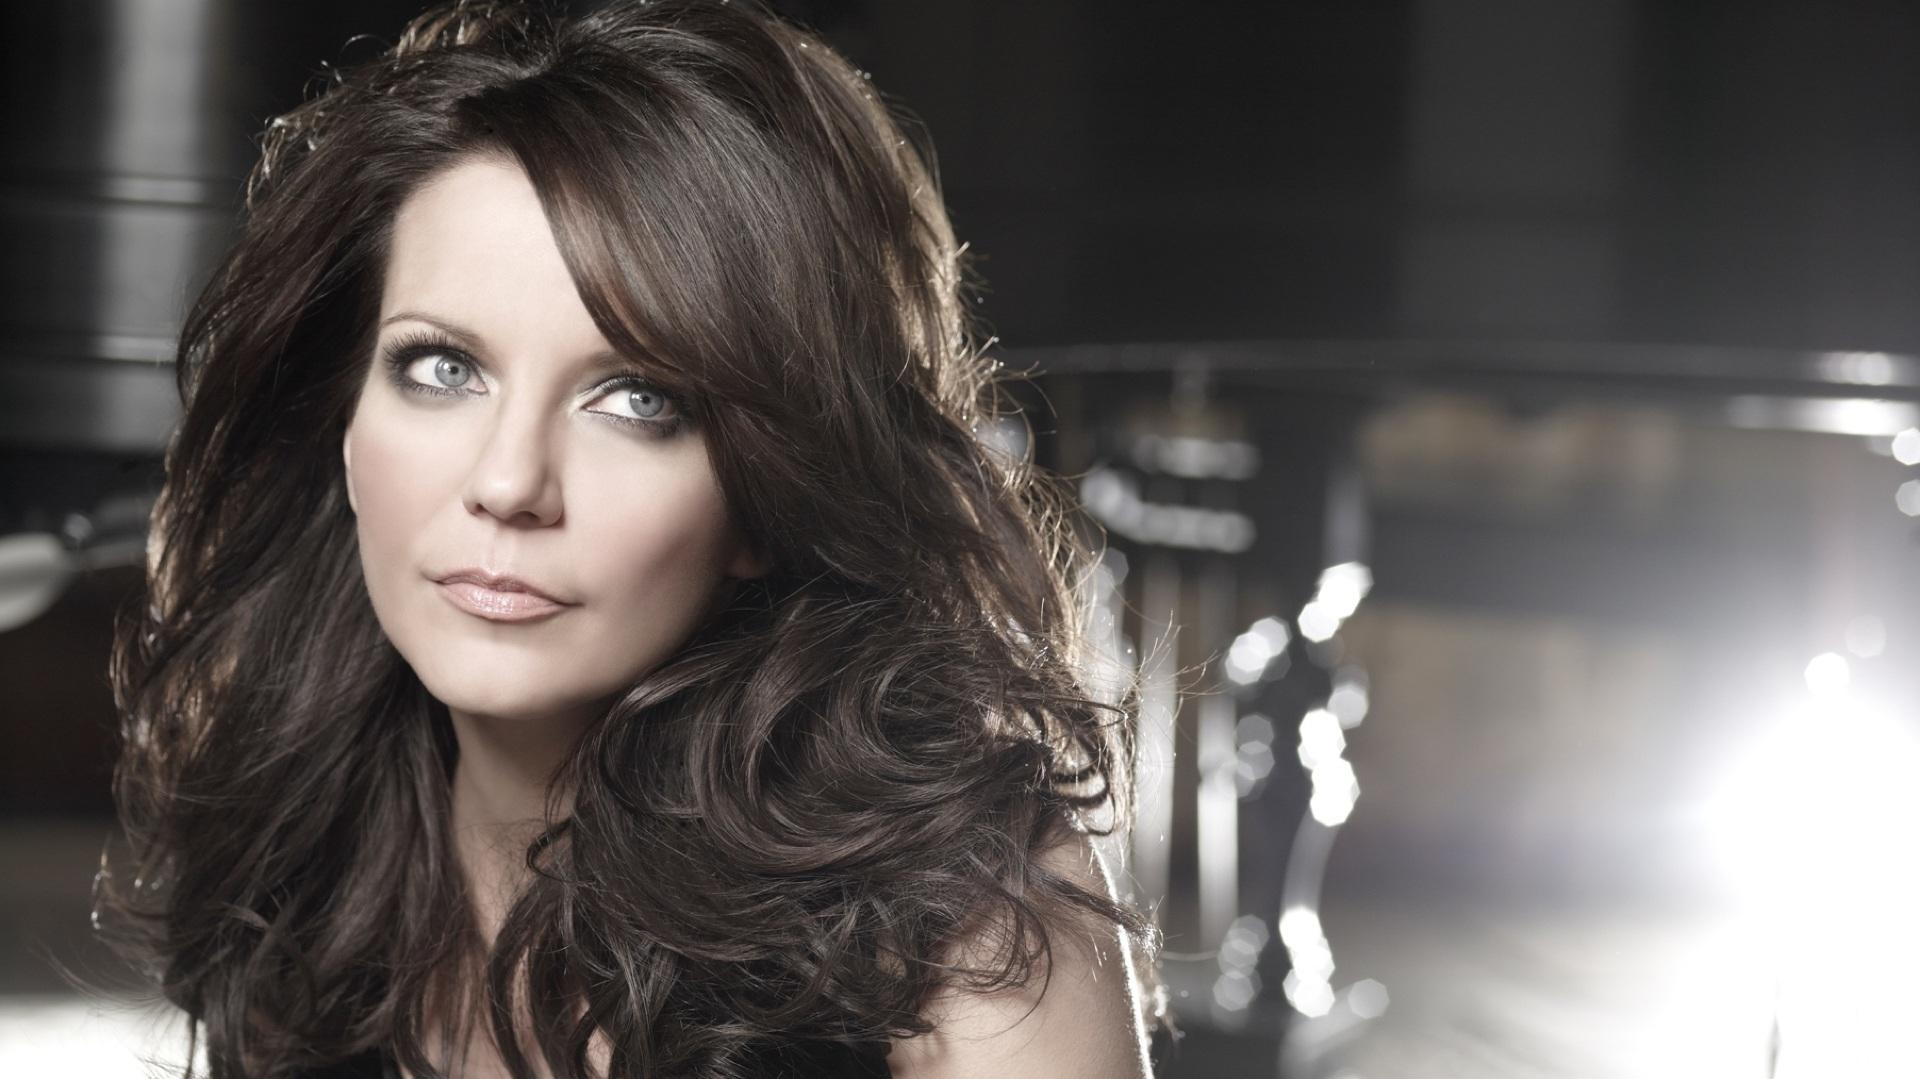 Martina Mcbride Music Video Looking For Actors Auditions